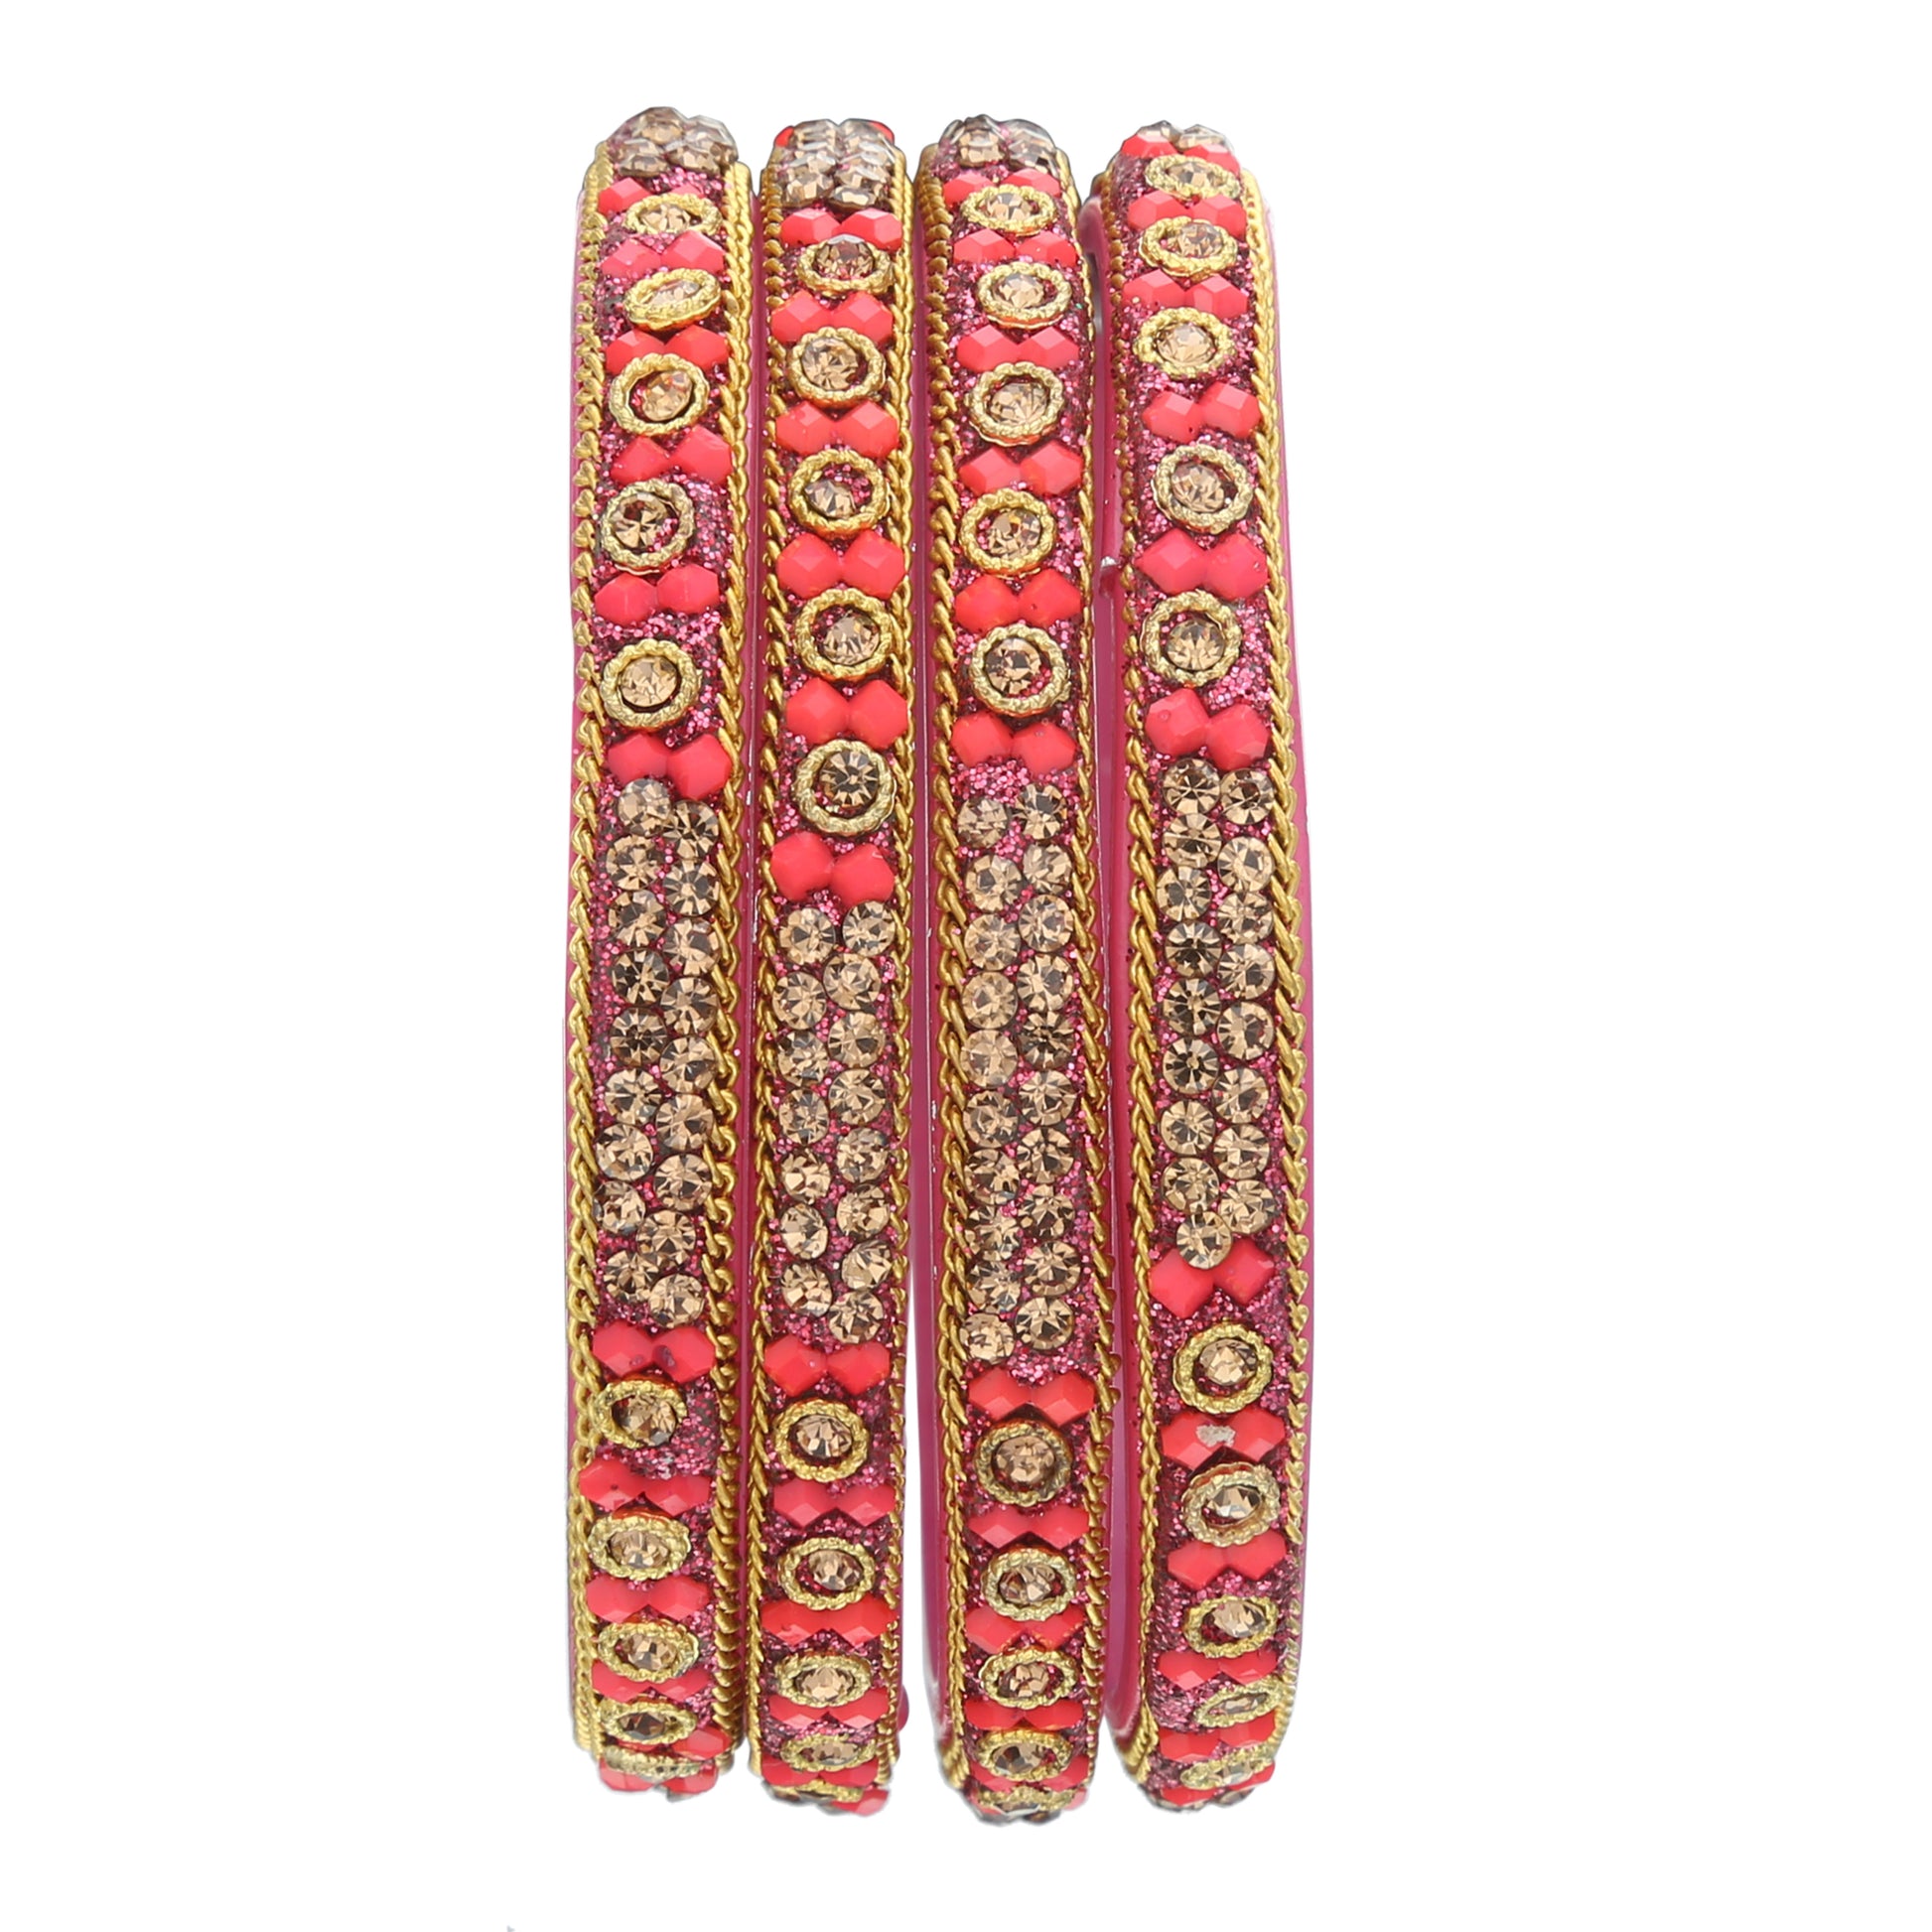 sukriti handcrafted glossy zircon crystal pink glass bangles for women – set of 4